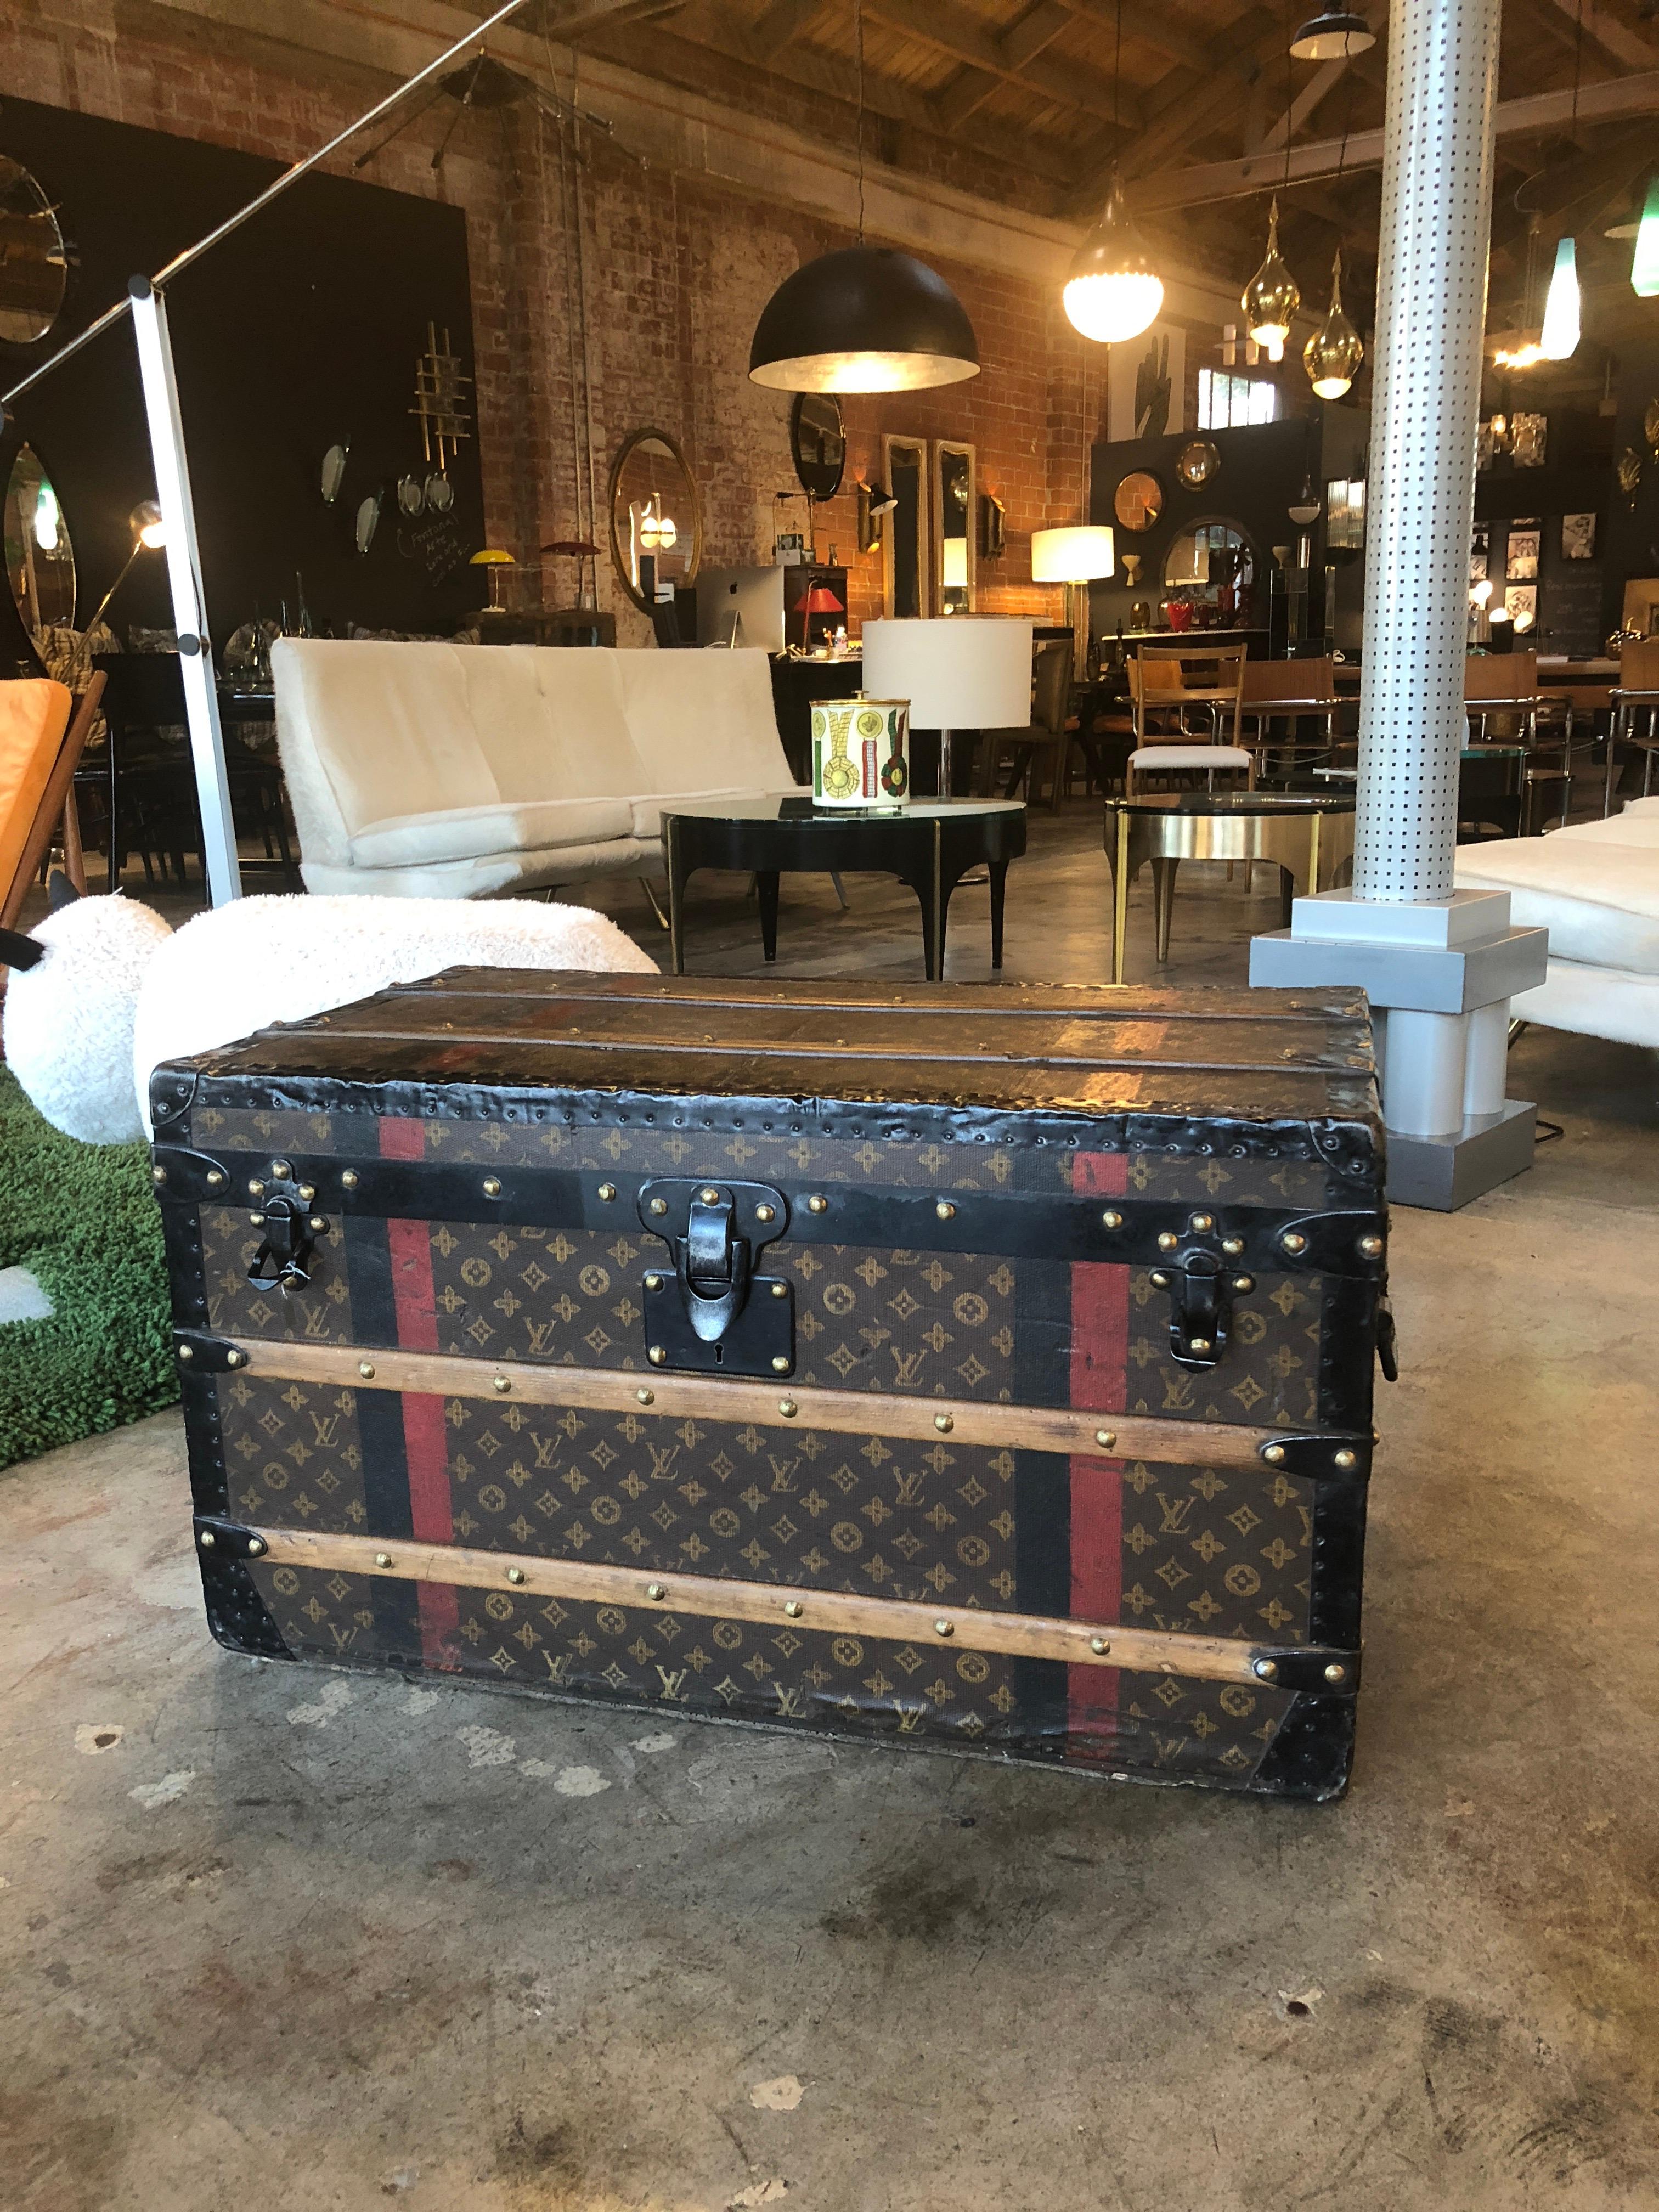 A Louis Vuitton trunk. LV monogram pattern covers the exterior. The interior is fully lined and distinctive quilted fabric with LV embossed ribbon lines the inside of the lid. Initials stenciled on both sides. A majestic piece that would take place